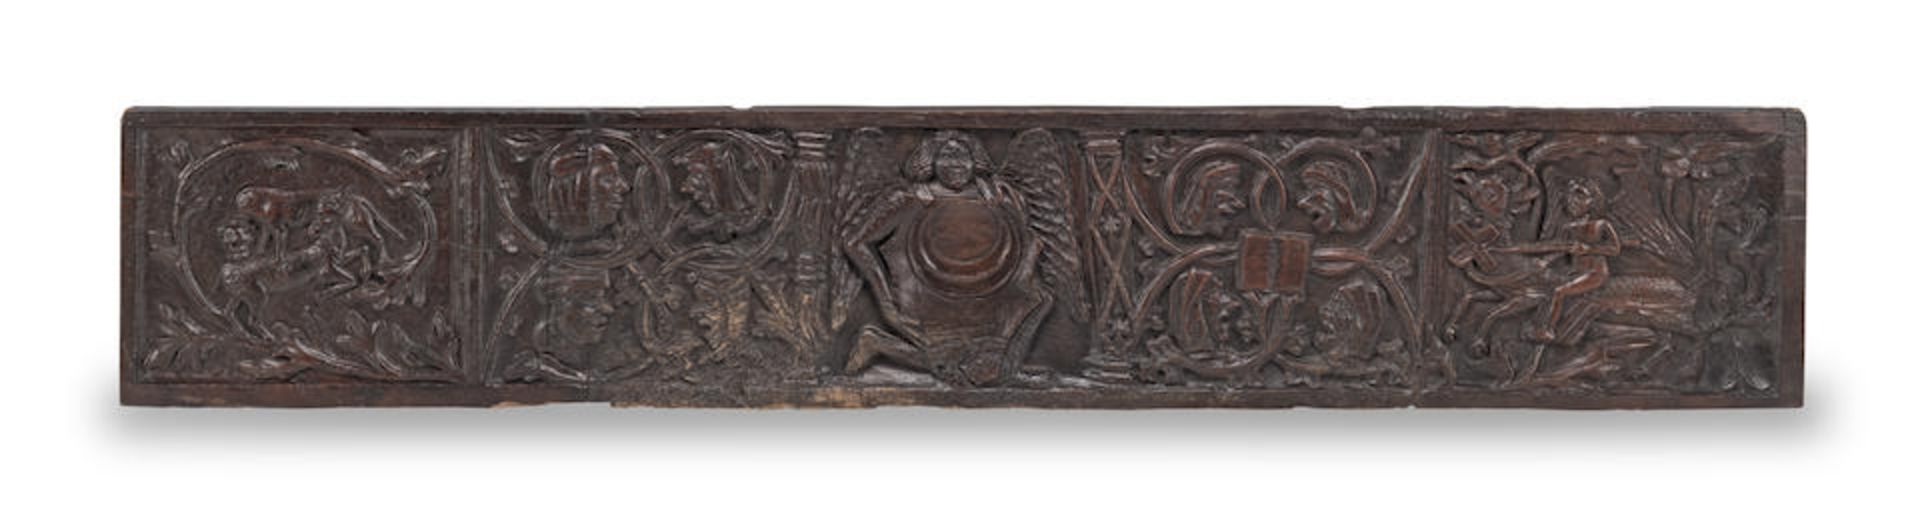 A Northern European carved oak frieze panel probably Flemish, late 15th/early 16th century